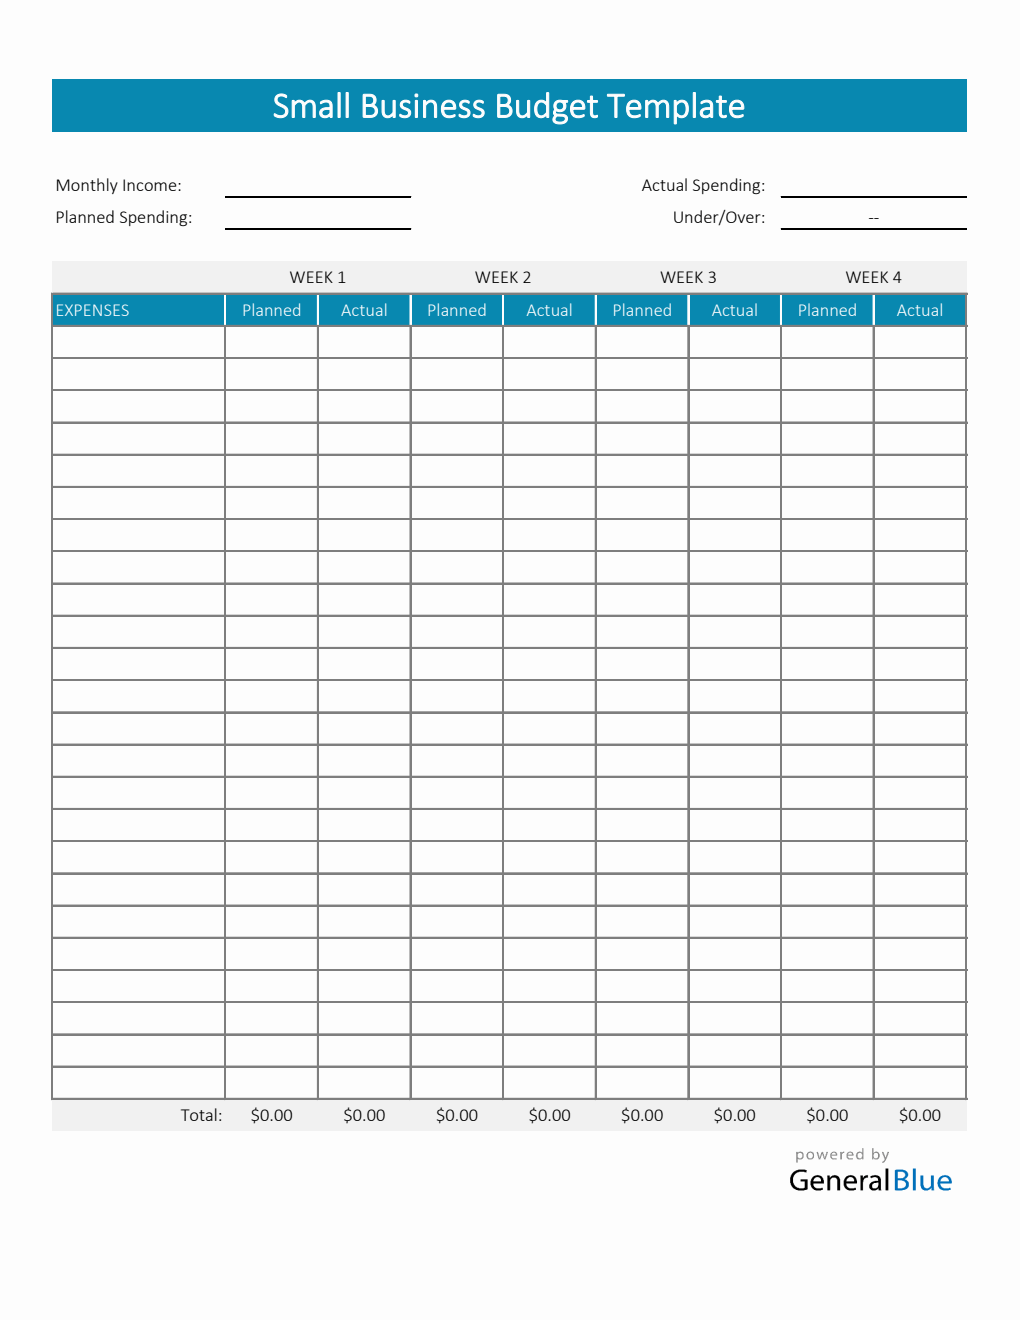 Small Business Budget Template in Excel (Colorful)